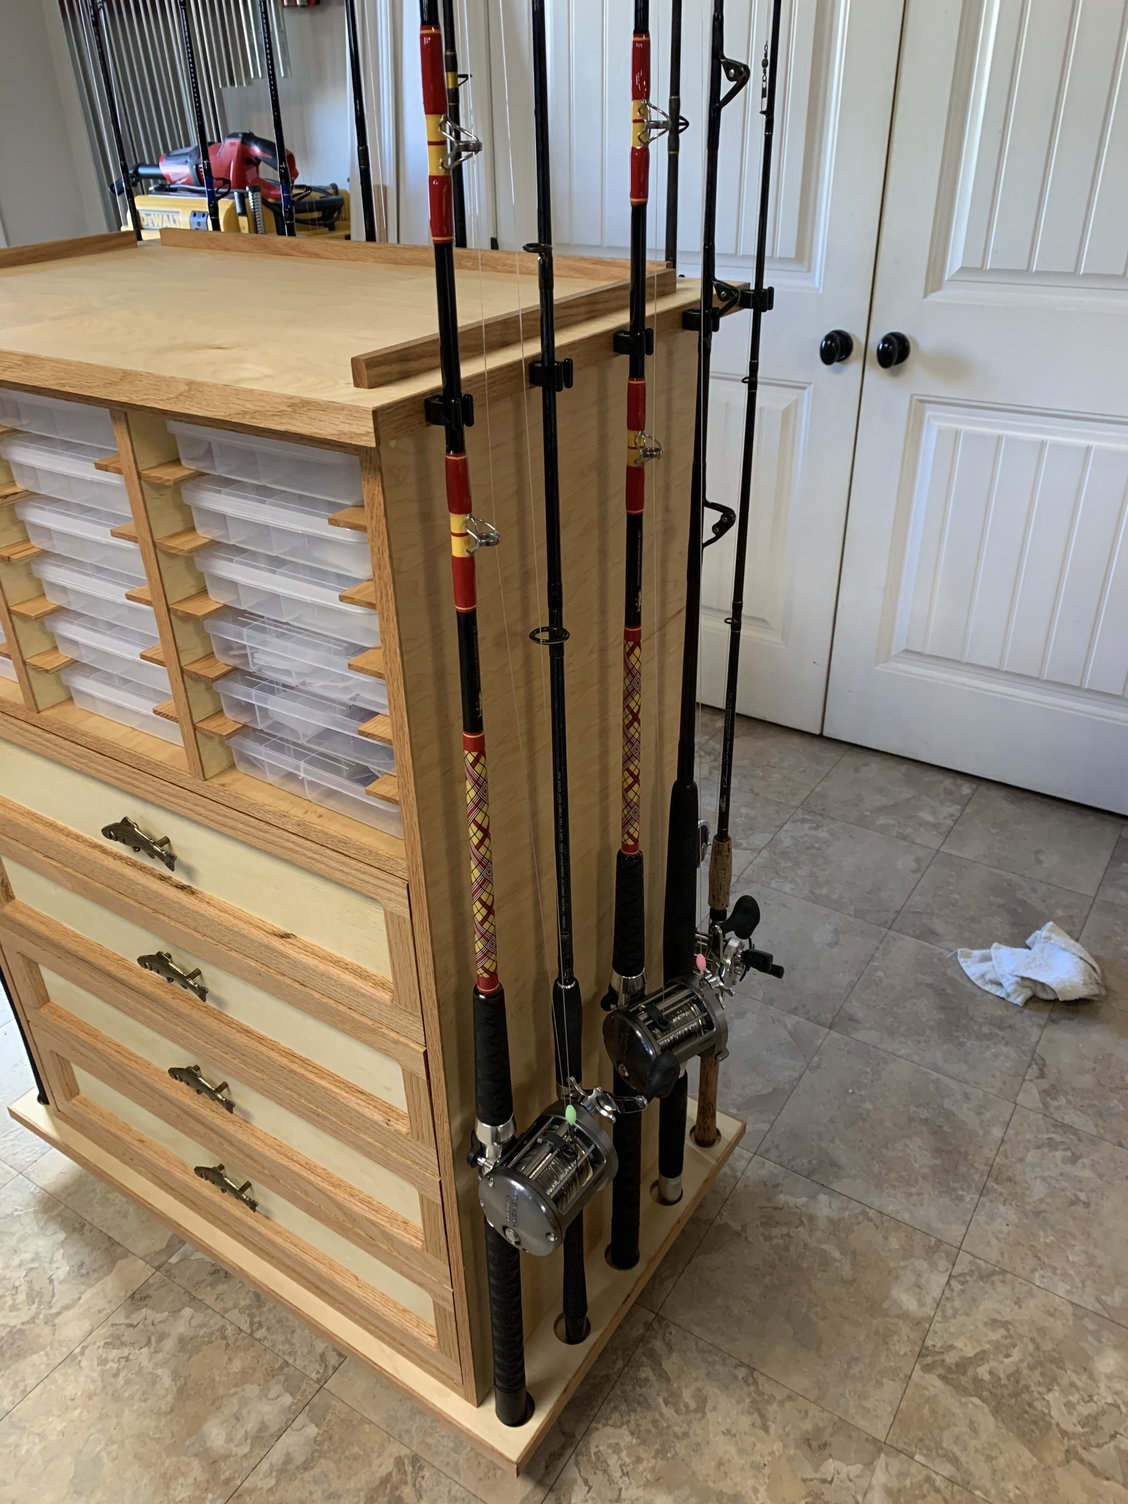 At home rod storage - Page 6 - The Hull Truth - Boating and Fishing Forum